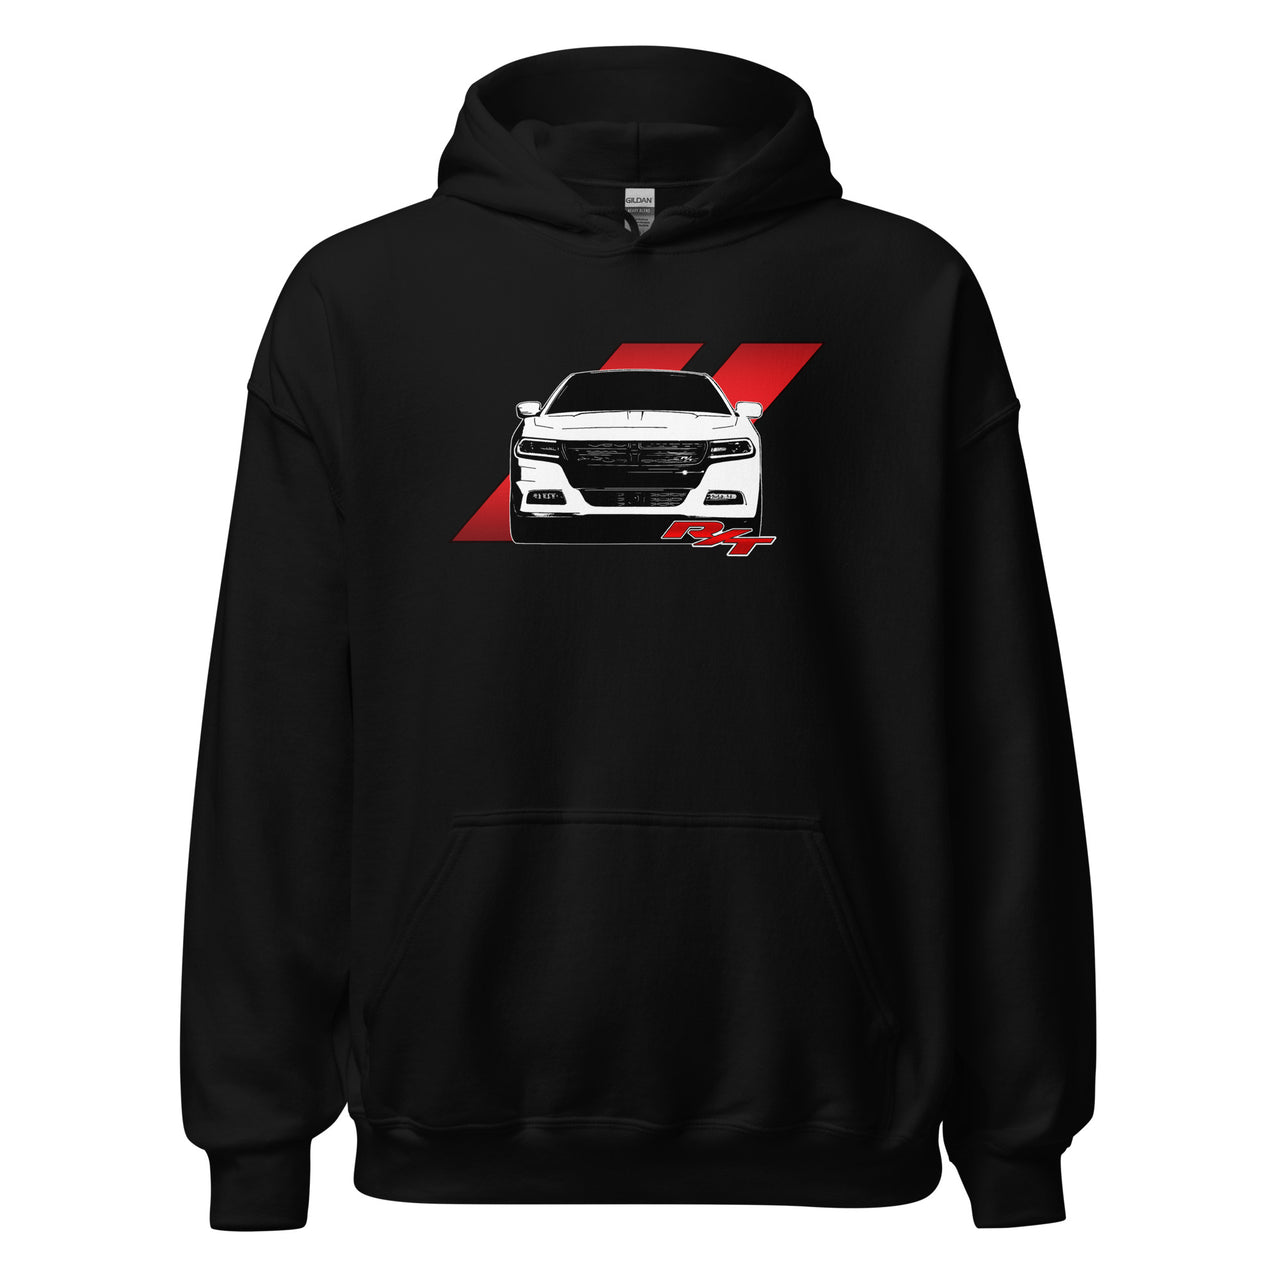 15-19 Charger R/T Hoodie in black